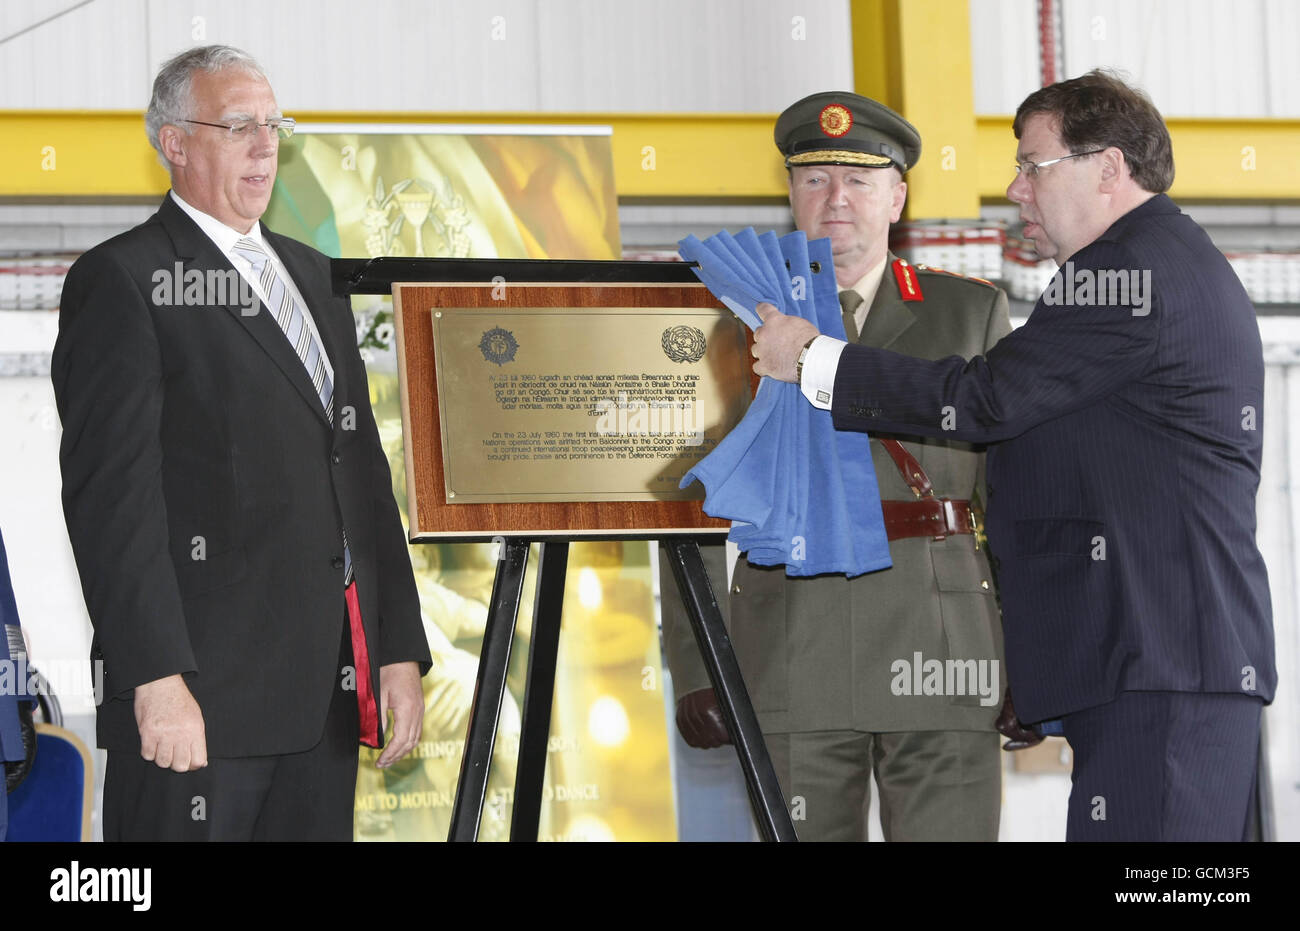 Taoiseach Brian Cowen (right), Defence Minister Tony Killeen (left) and Chief of Staff Lieutenant General Sean McCann unveil a plaque during the commemoration of the 50th anniversary of the first deployment of Irish peacekeepers to the Congo at Casement Aerodrome, Baldonnel. Stock Photo